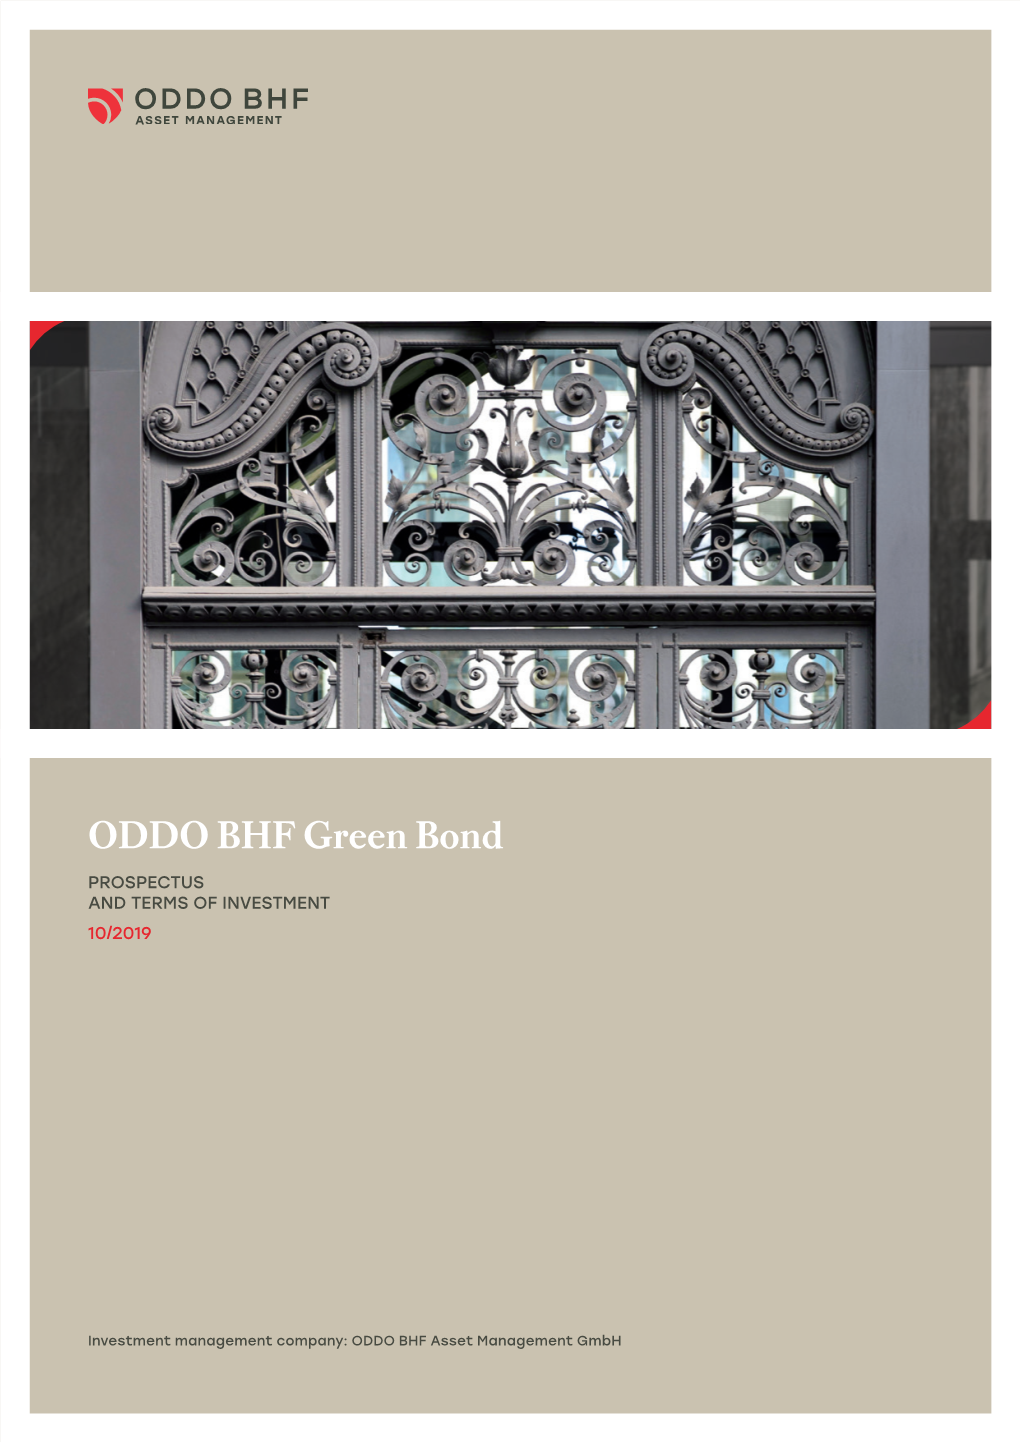 ODDO BHF Green Bond PROSPECTUS and TERMS of INVESTMENT 10/2019